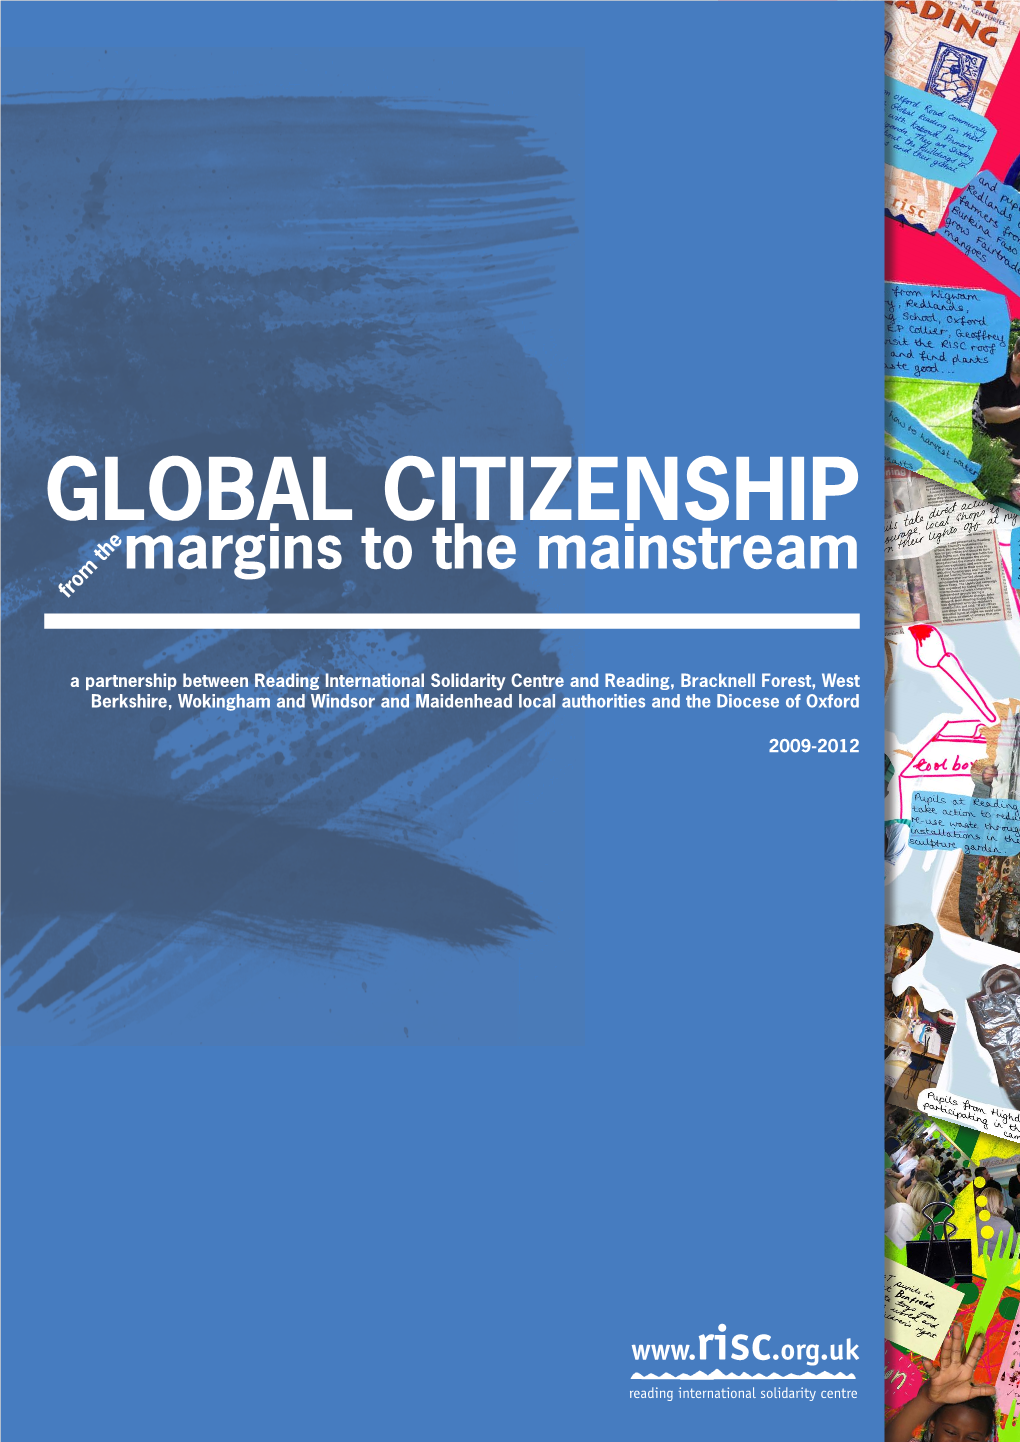 GLOBAL CITIZENSHIP Margins to the Mainstream from The